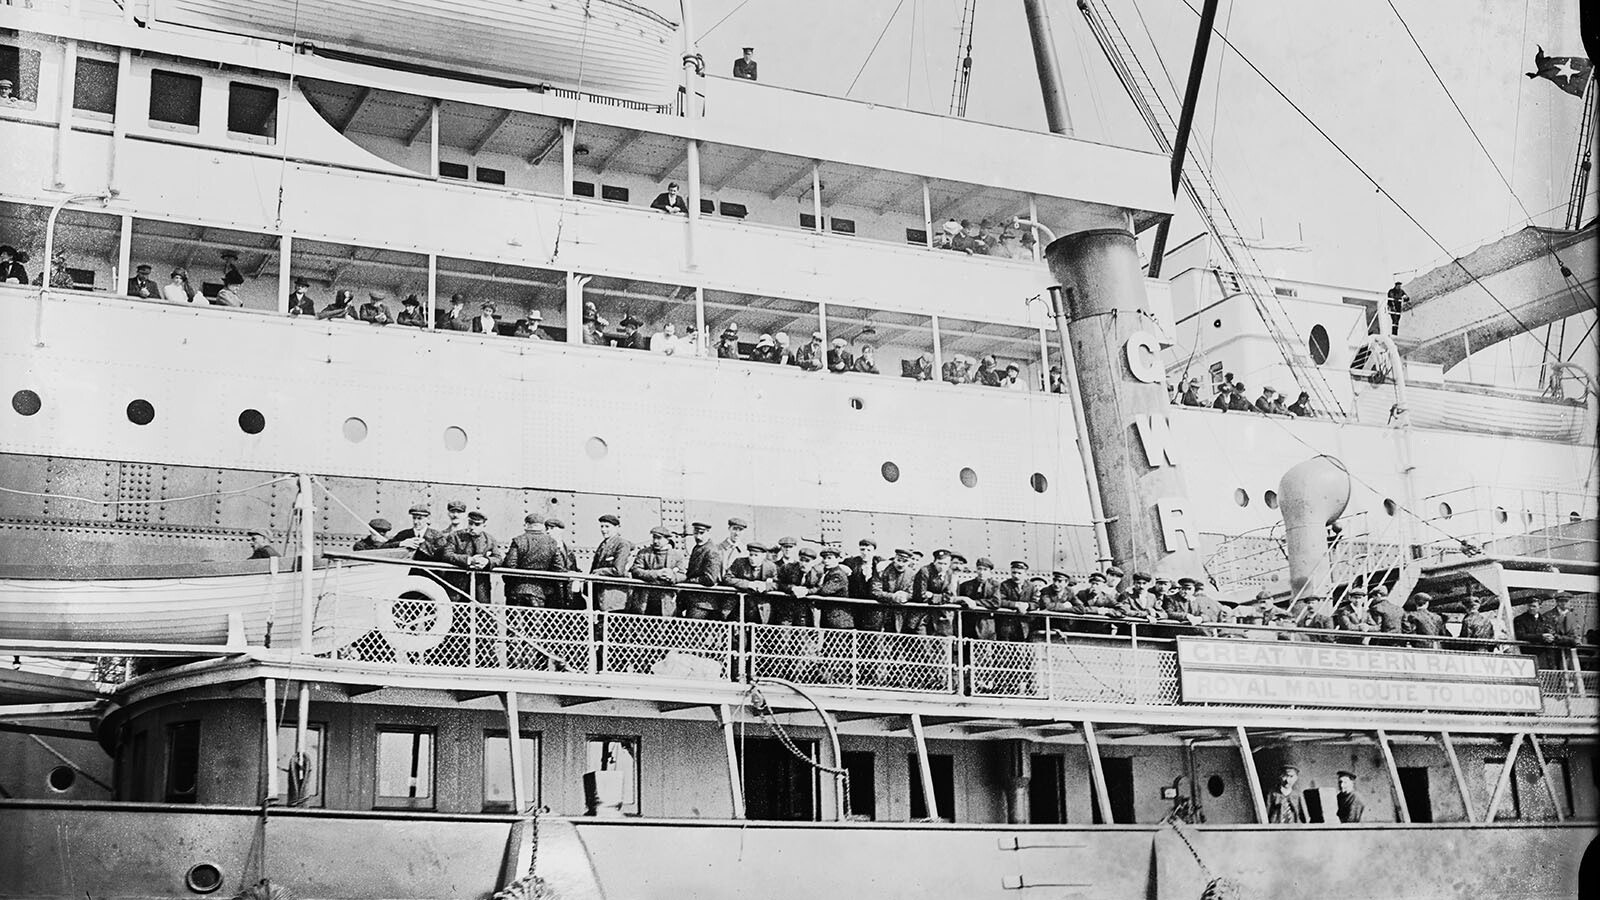 Survivors of the Titanic disaster on April 29, 1912, board a Great Western Railway ferry at Plymouth after arriving in England on the SS Lapland.